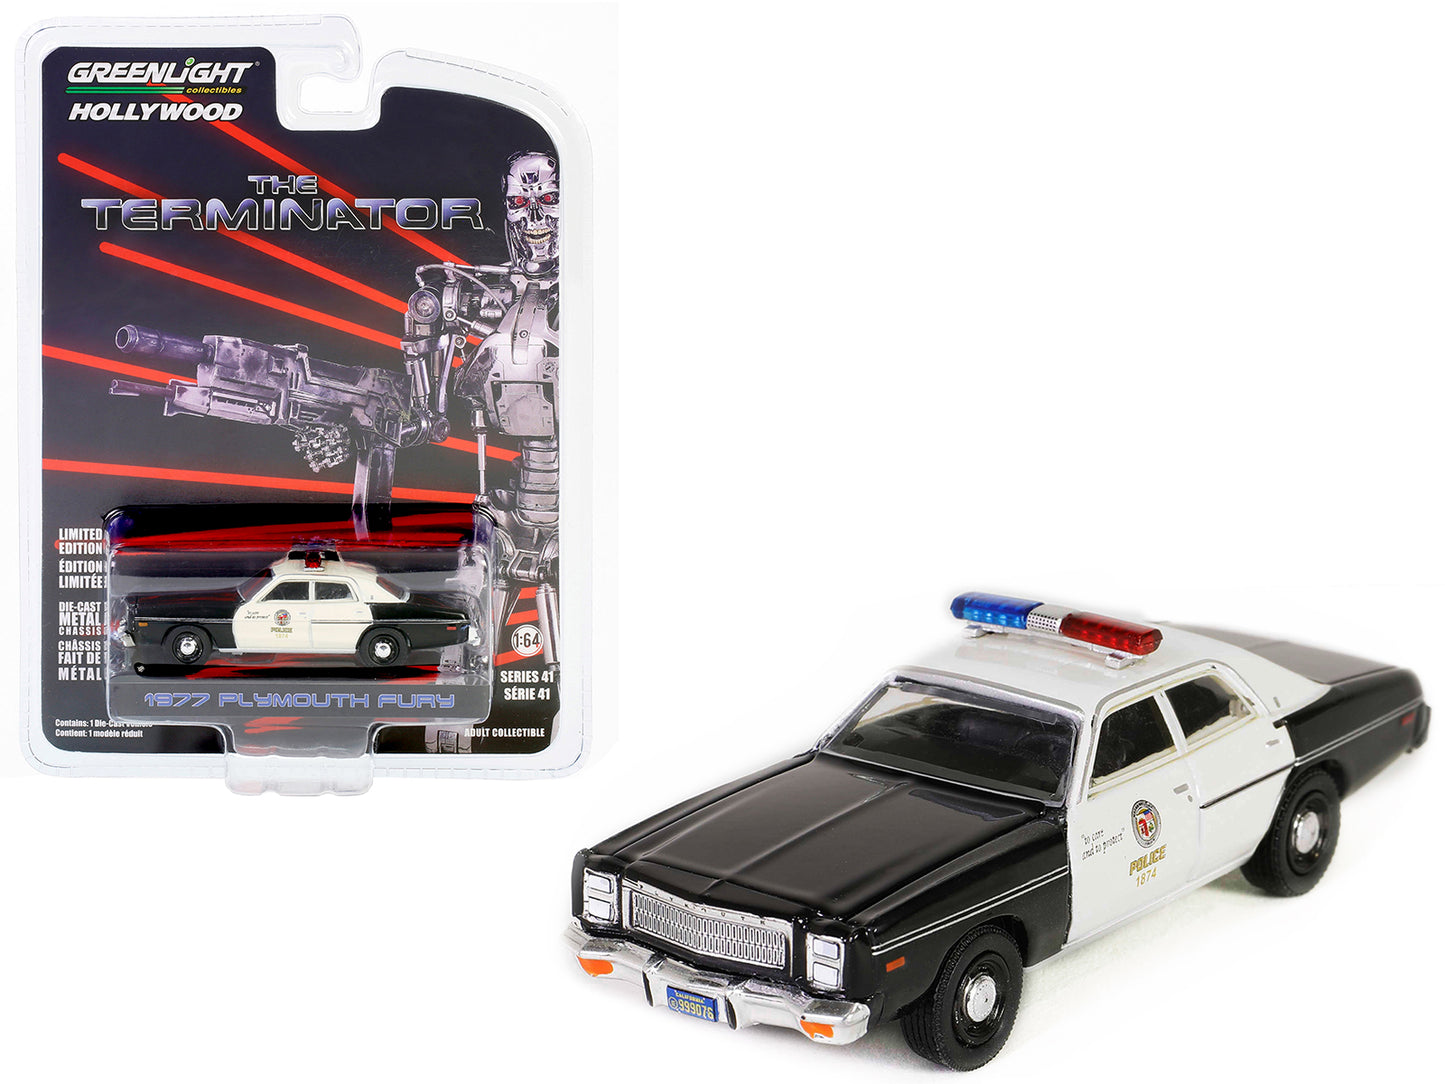 Brand new 1/64 scale diecast car model of 1977 Plymouth Fury Black and White "Metropolitan Police" "The Terminator" (198